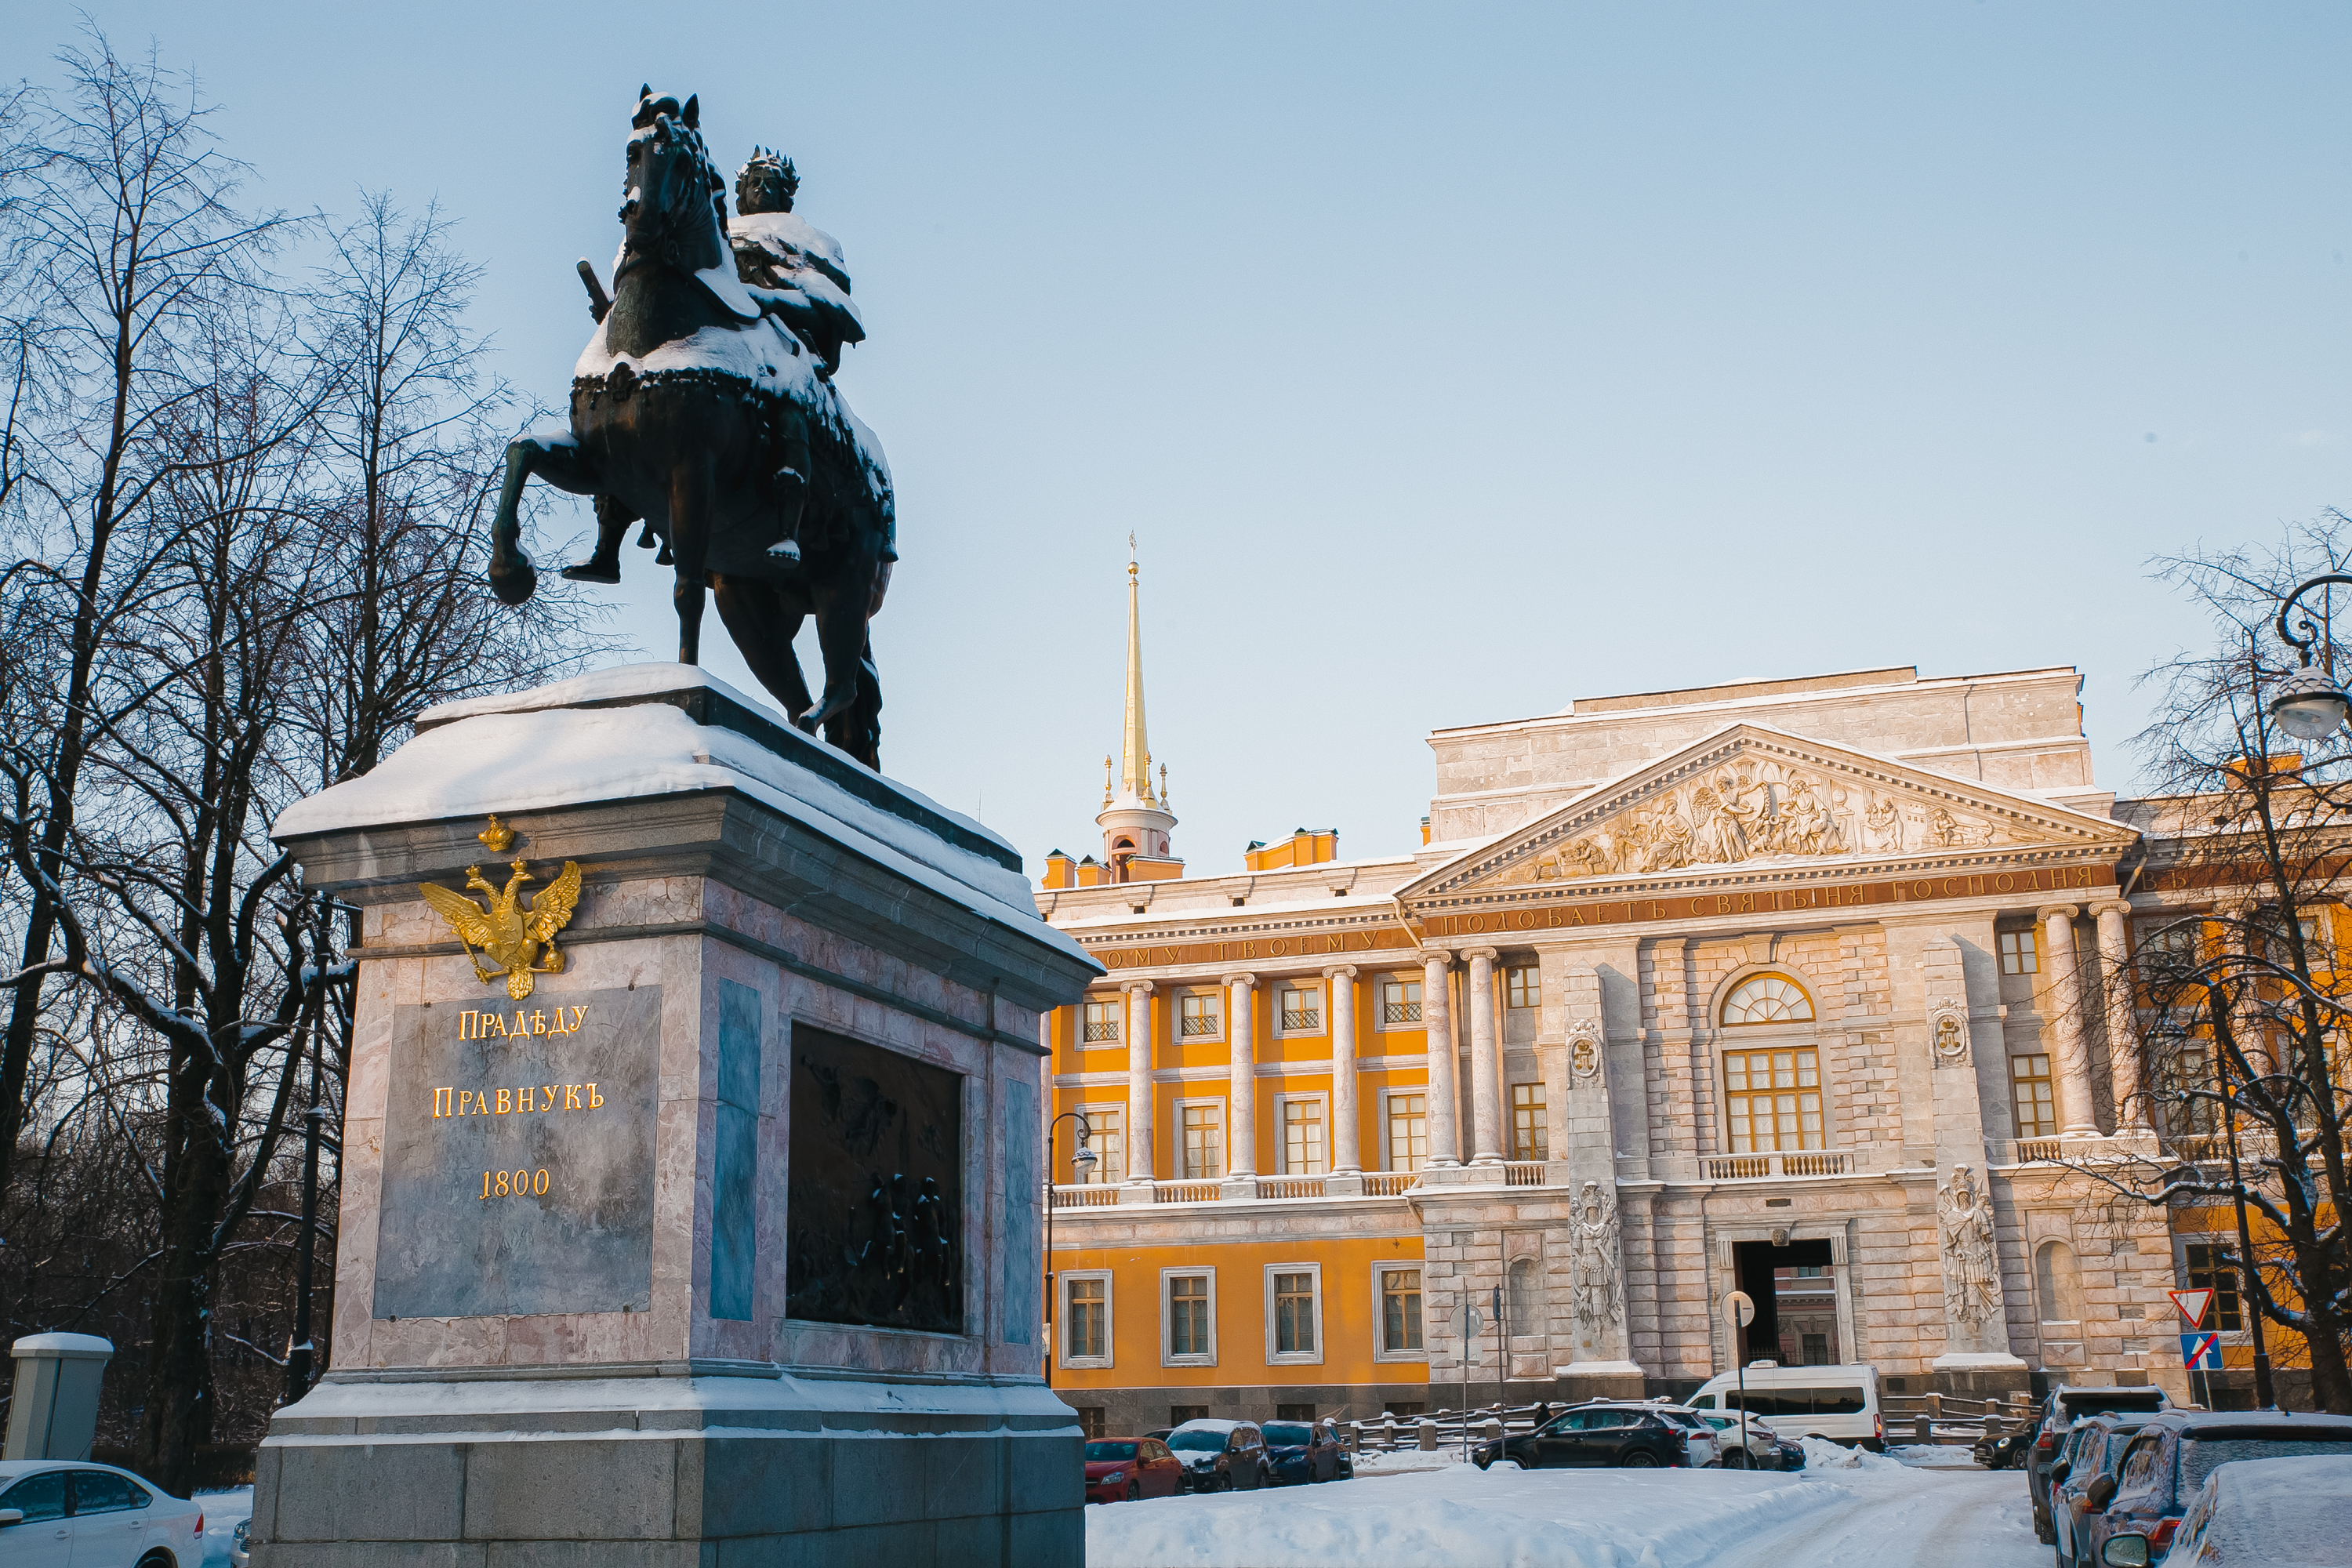 The Monument to Peter I at the Mikhailovsky Castle